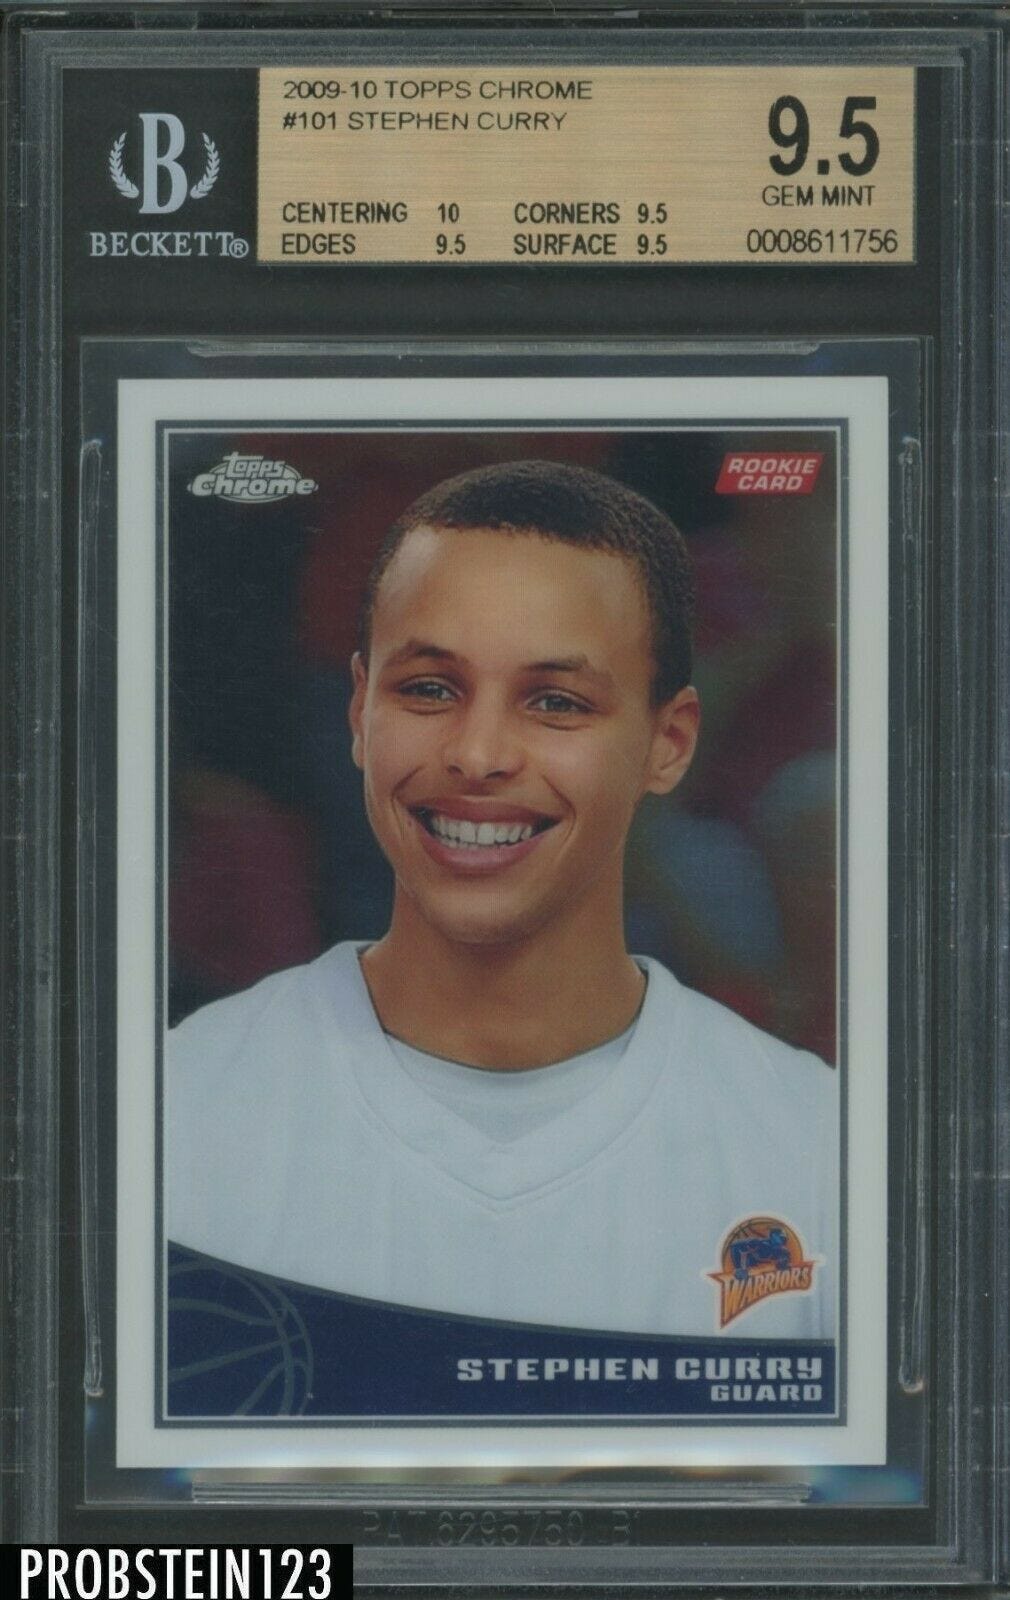 Image 1 - 2009-10 Topps Chrome #101 Stephen Curry RC Rookie /999 BGS 9.5 w/ 10 HIGH END